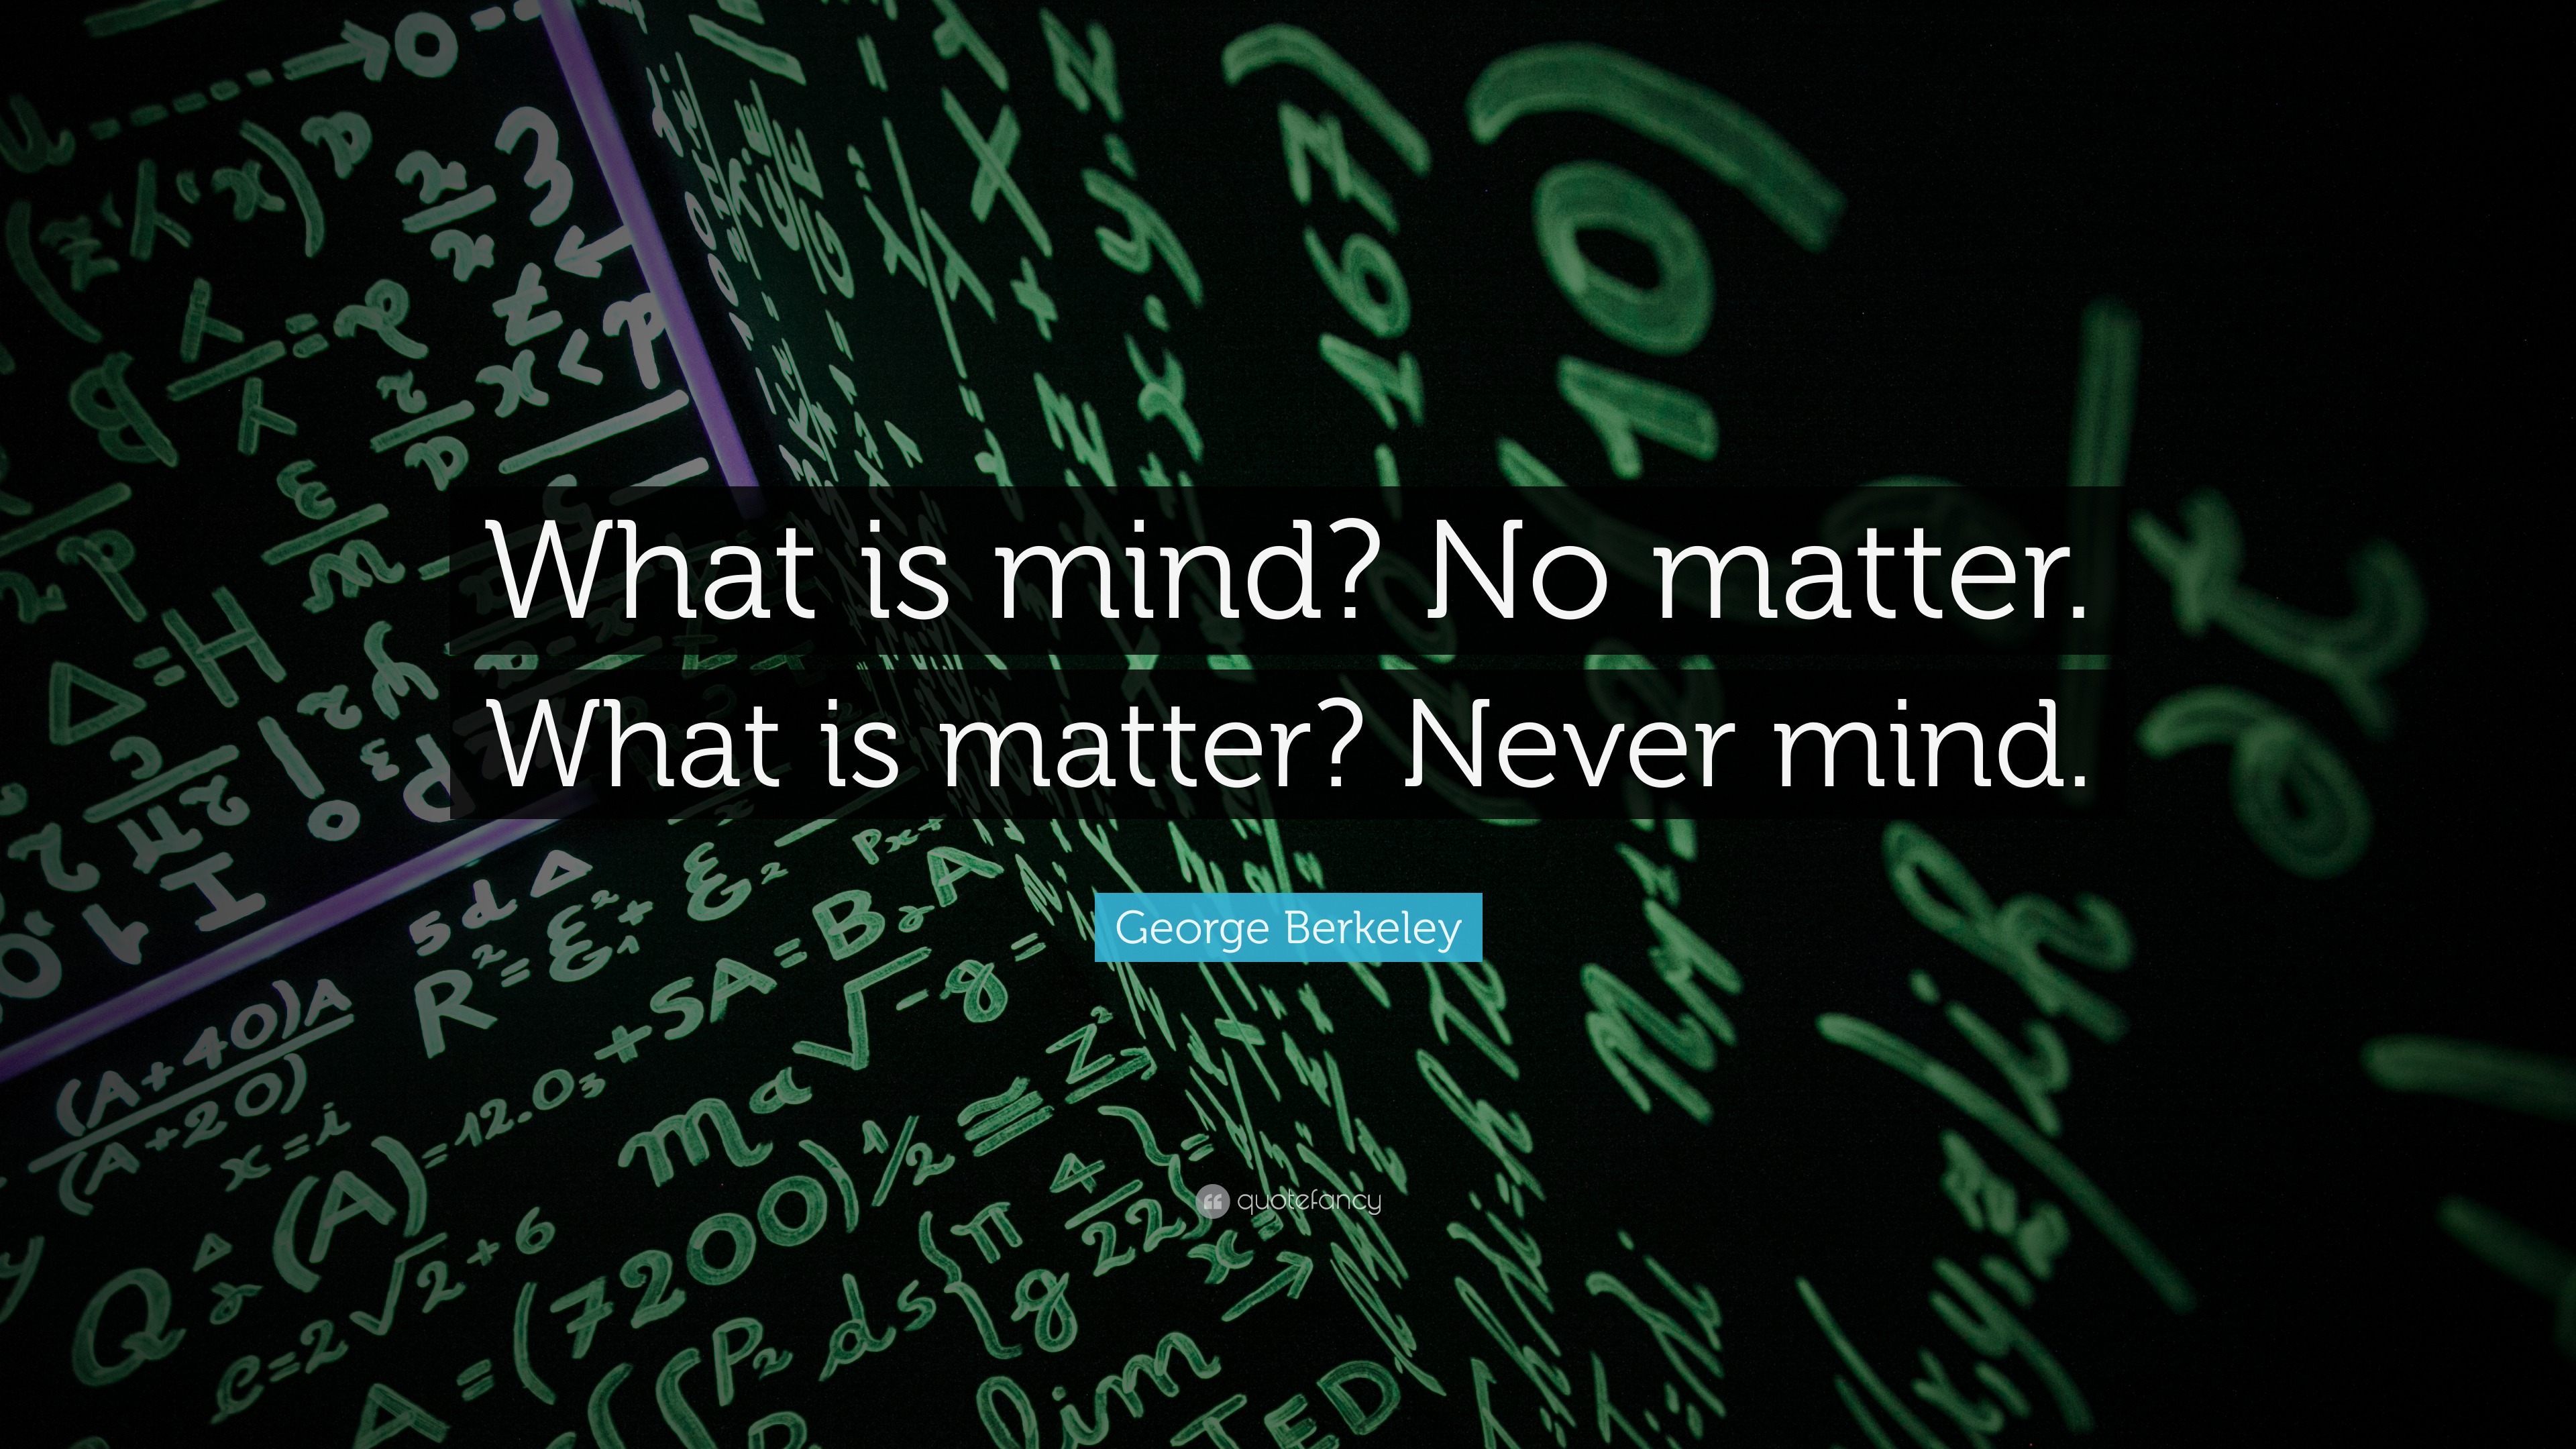 George Berkeley Quote: “What is mind? No matter. What is matter